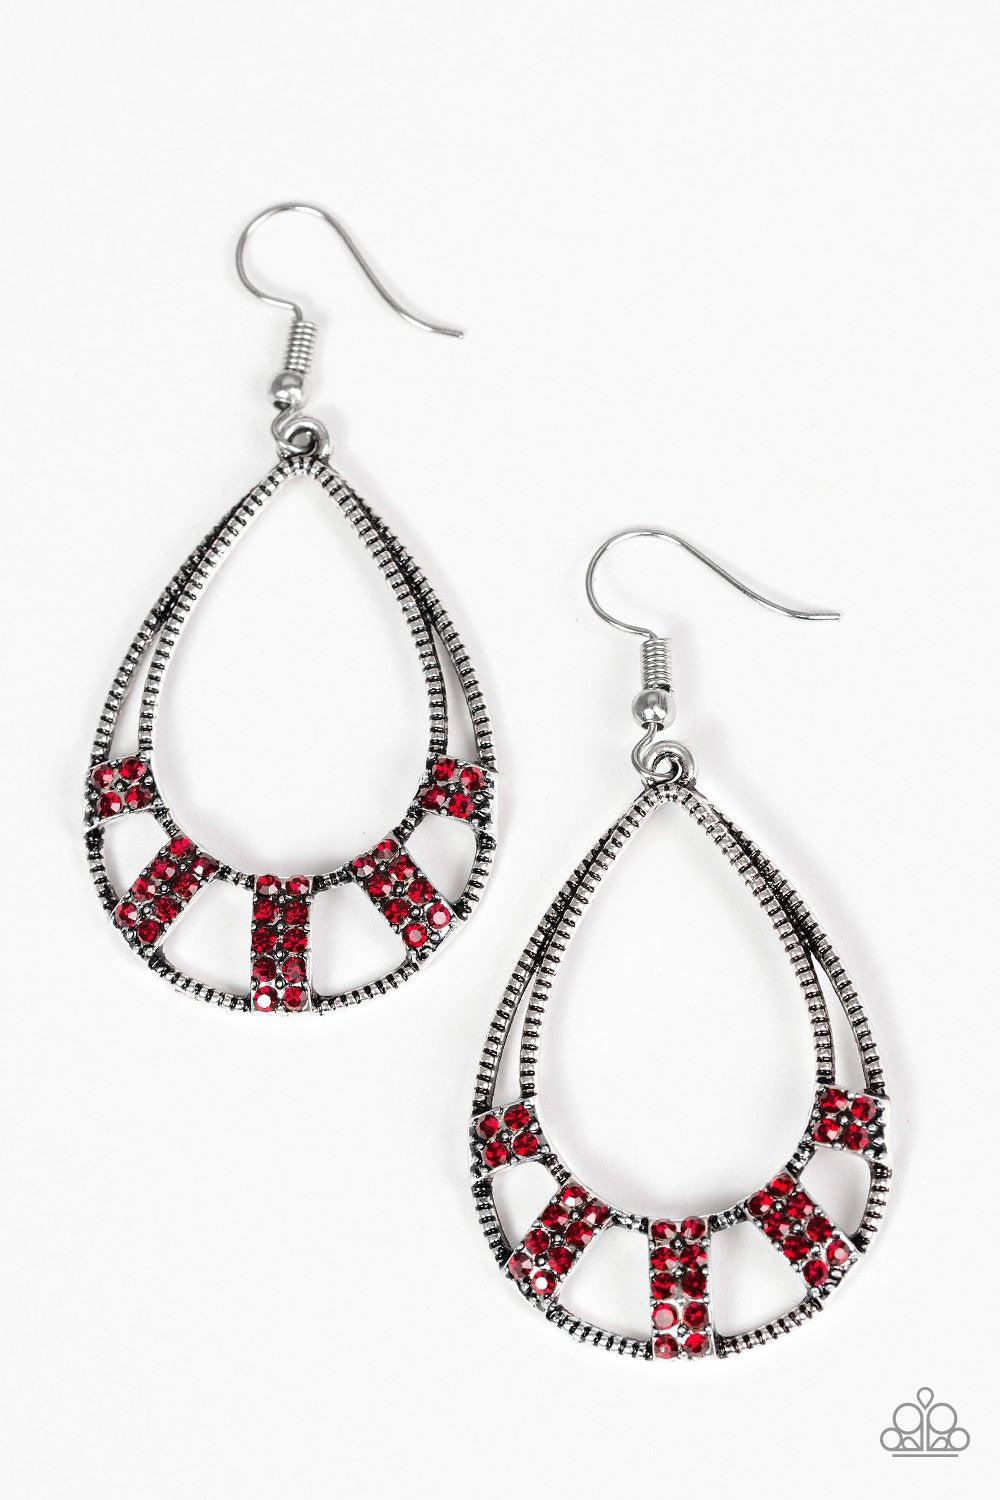 Trillion Dollar Teardrops Red Earrings - Paparazzi Accessories-CarasShop.com - $5 Jewelry by Cara Jewels